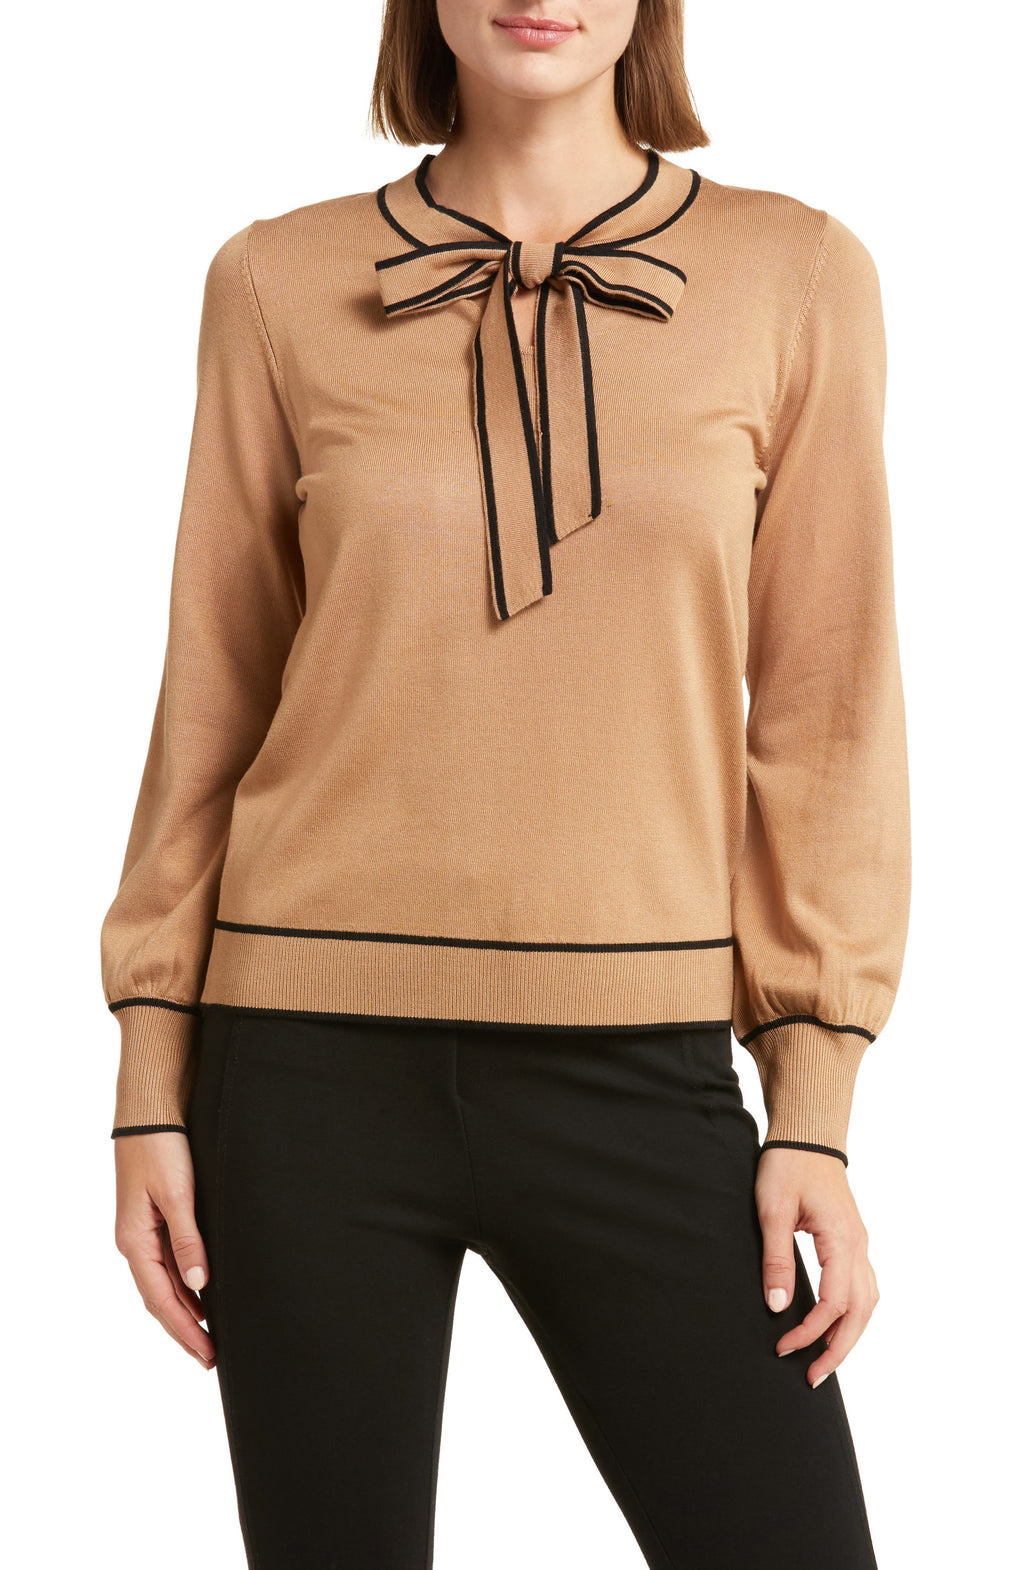 ADRIANNA PAPELL Tipped Bow Neck Sweater, Main, color, SOFT CAMEL/ BLACK